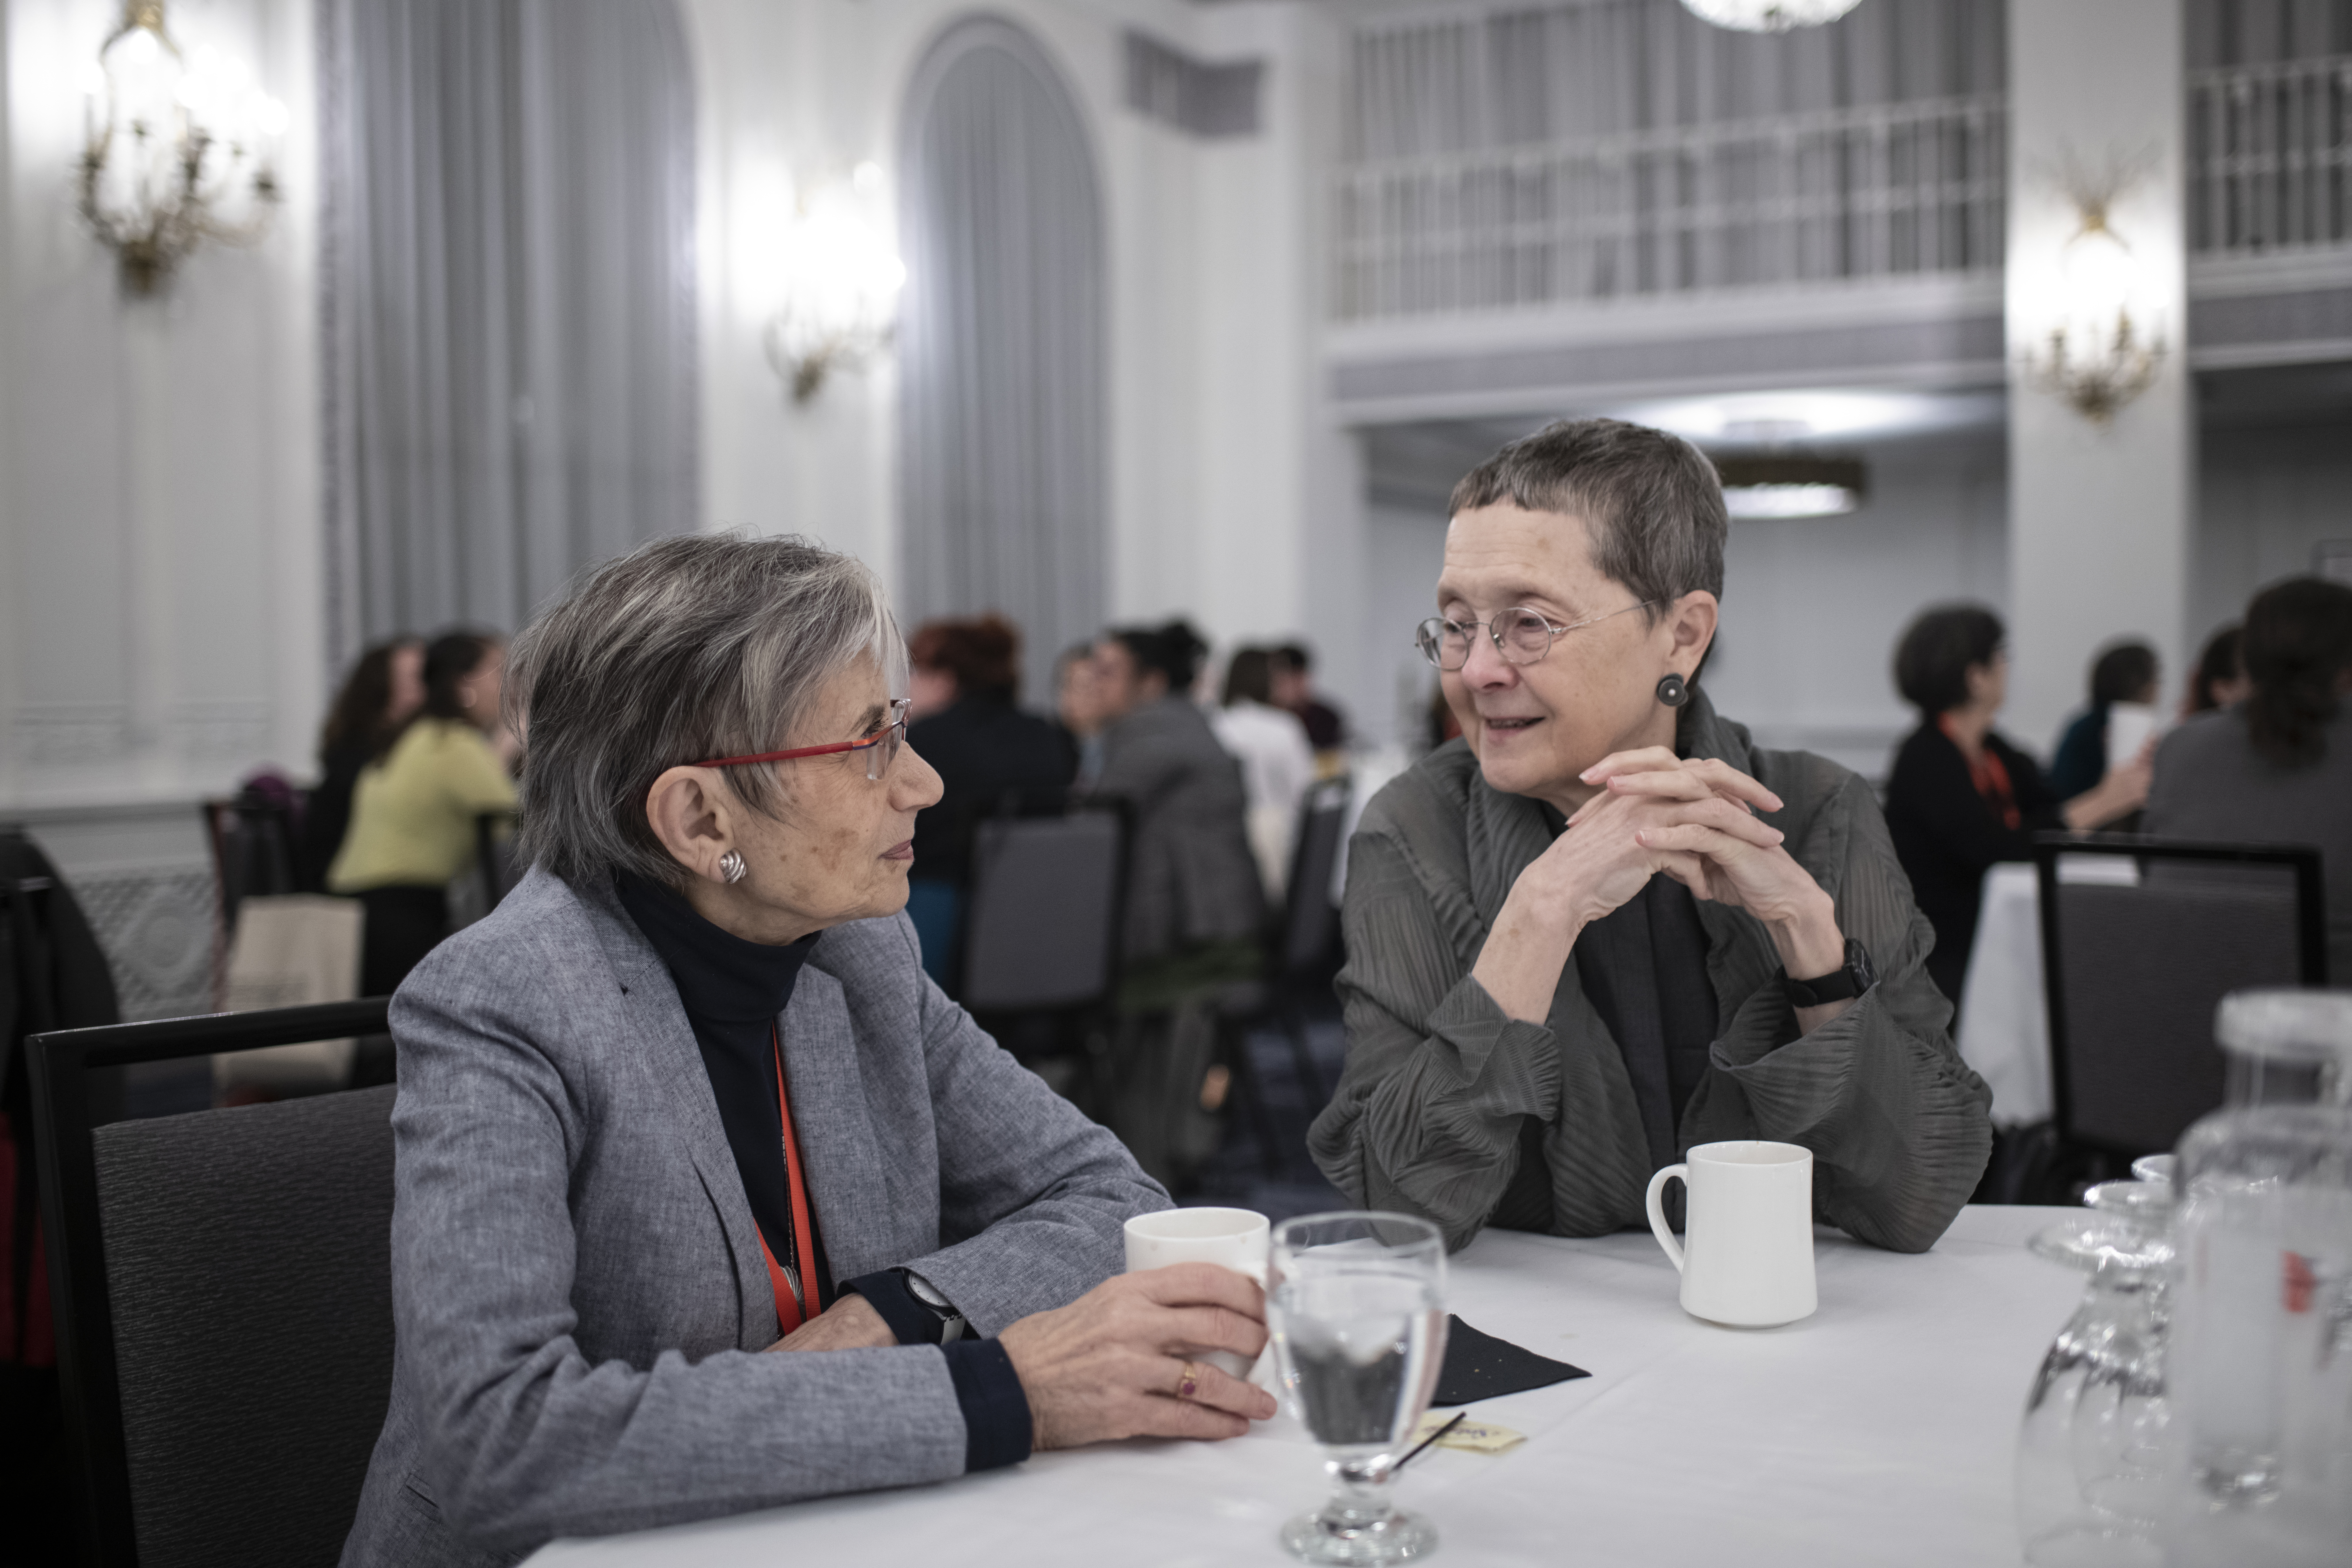 AHA president Mary Lindemann (right) speaks with Renate Bridenthal at the 2019 AHA Committee on Gender Equity breakfast.